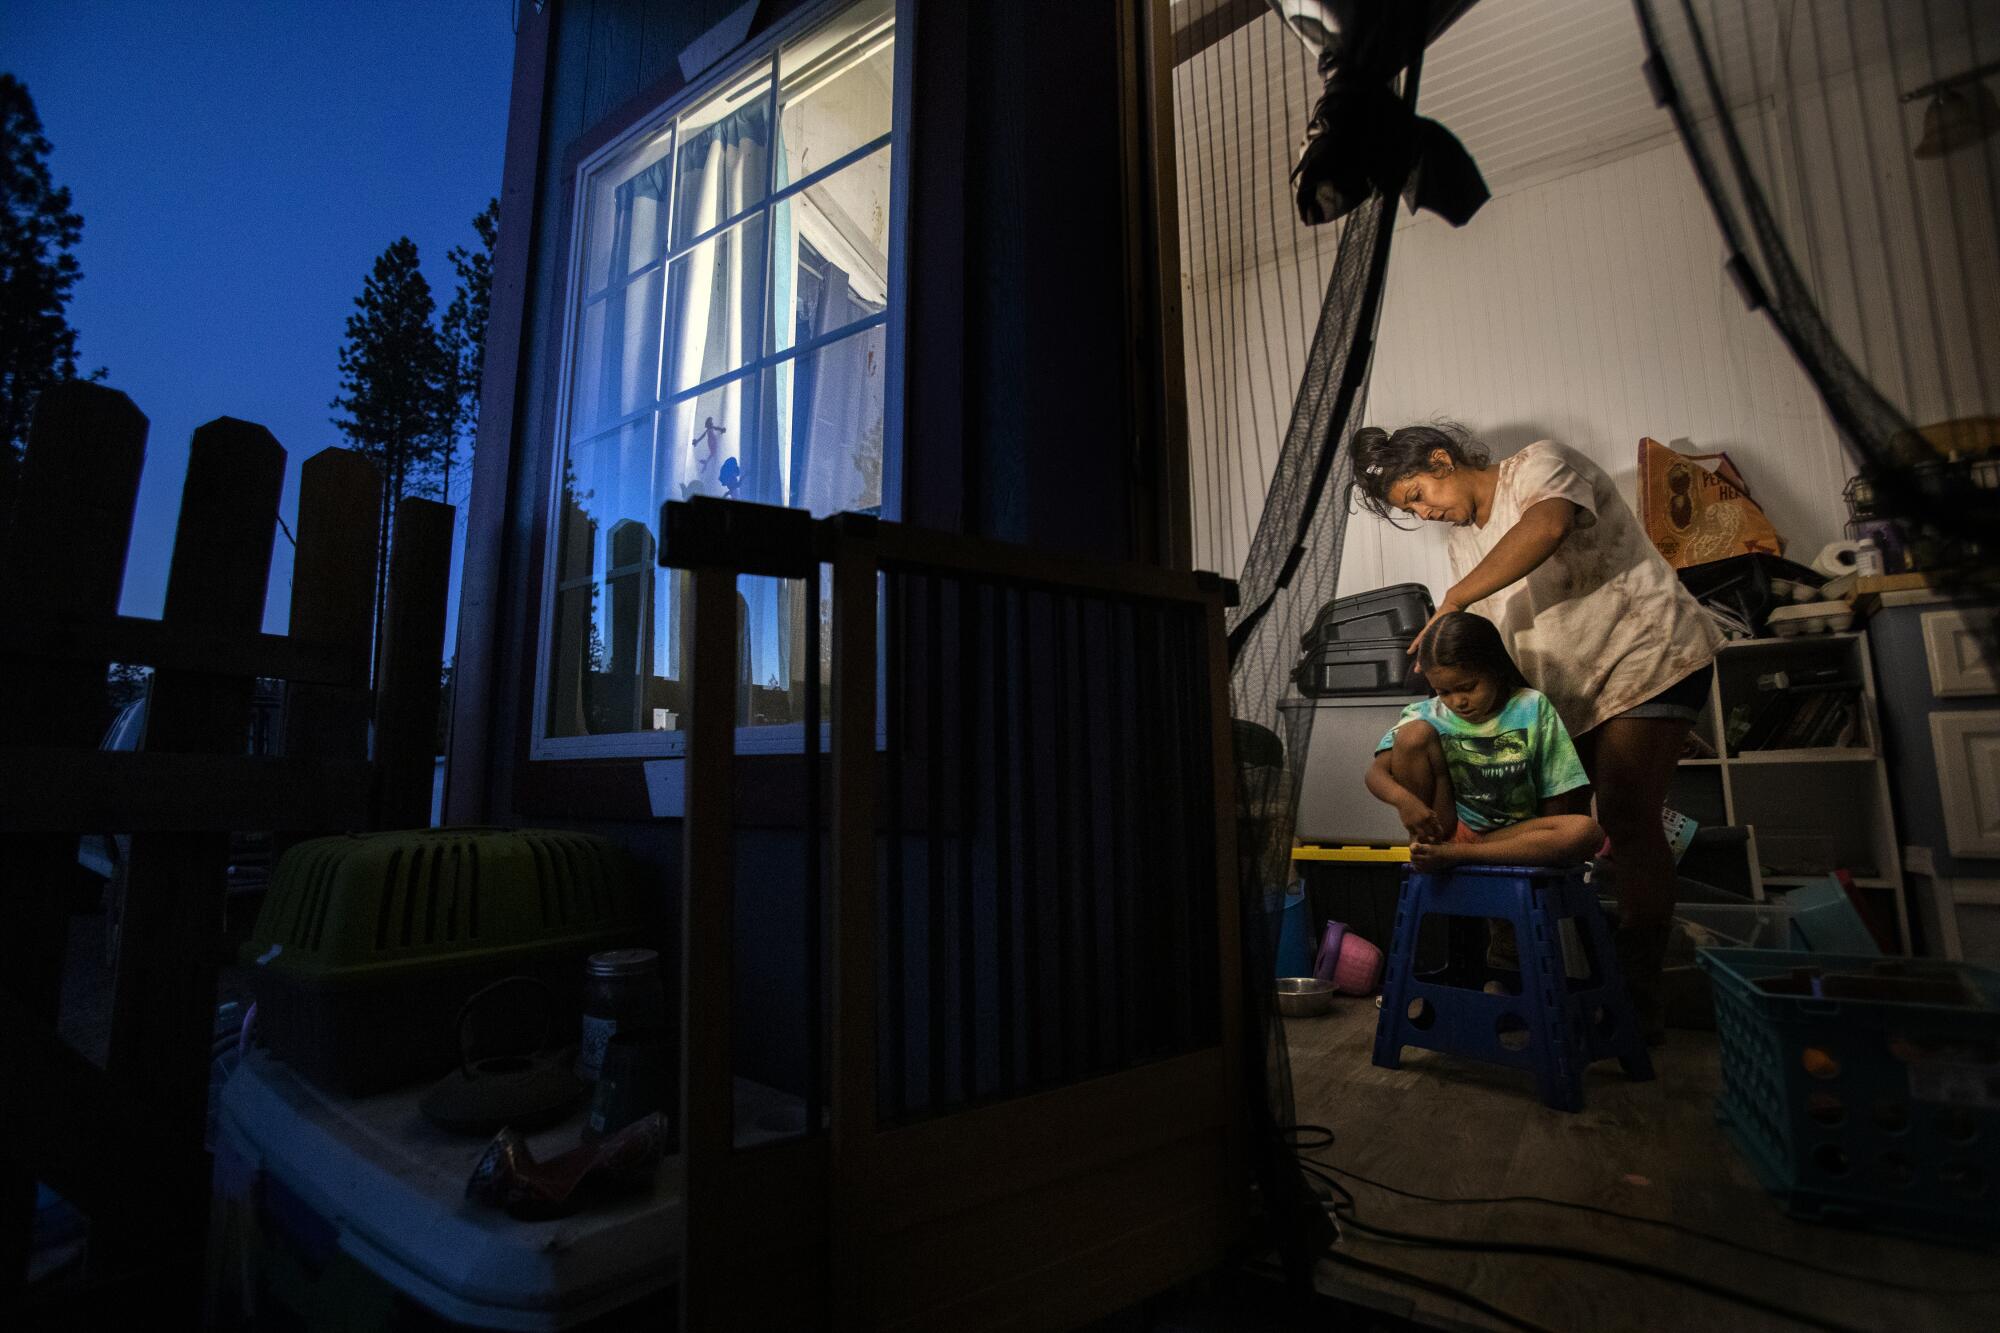 Inez Salinas brushes her daughter's hair inside their tiny home.